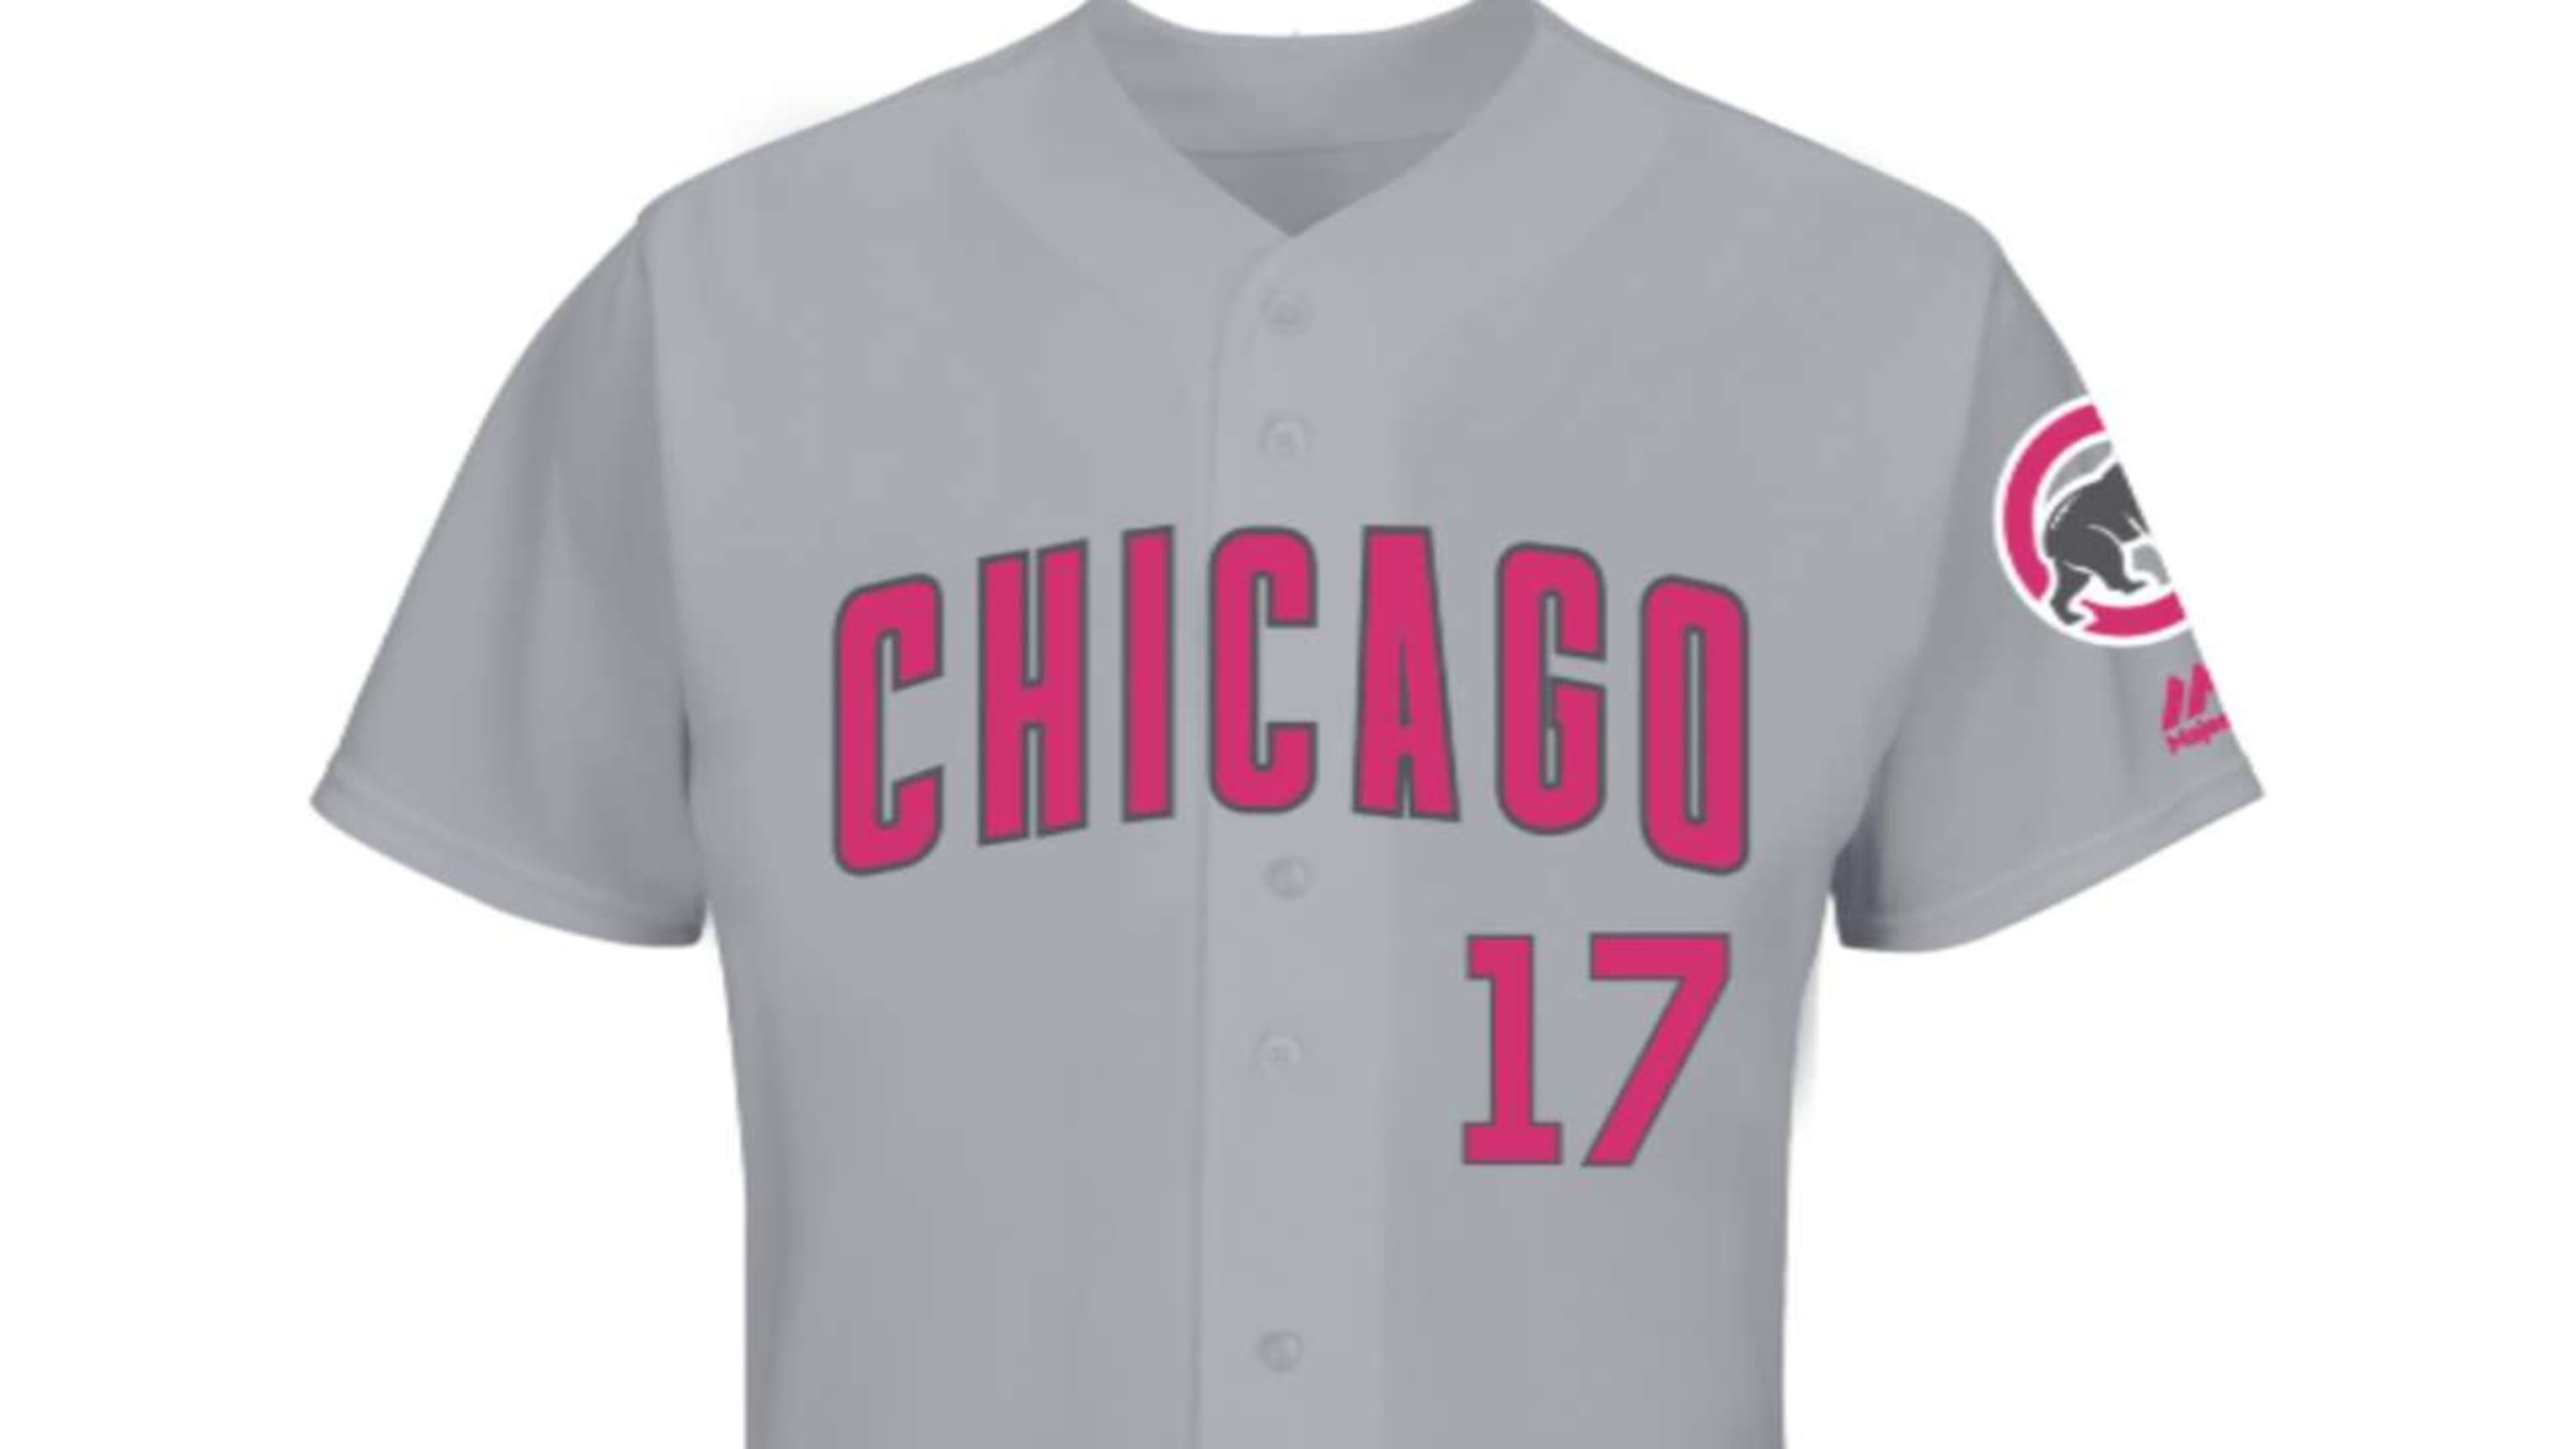 red sox fathers day uniform